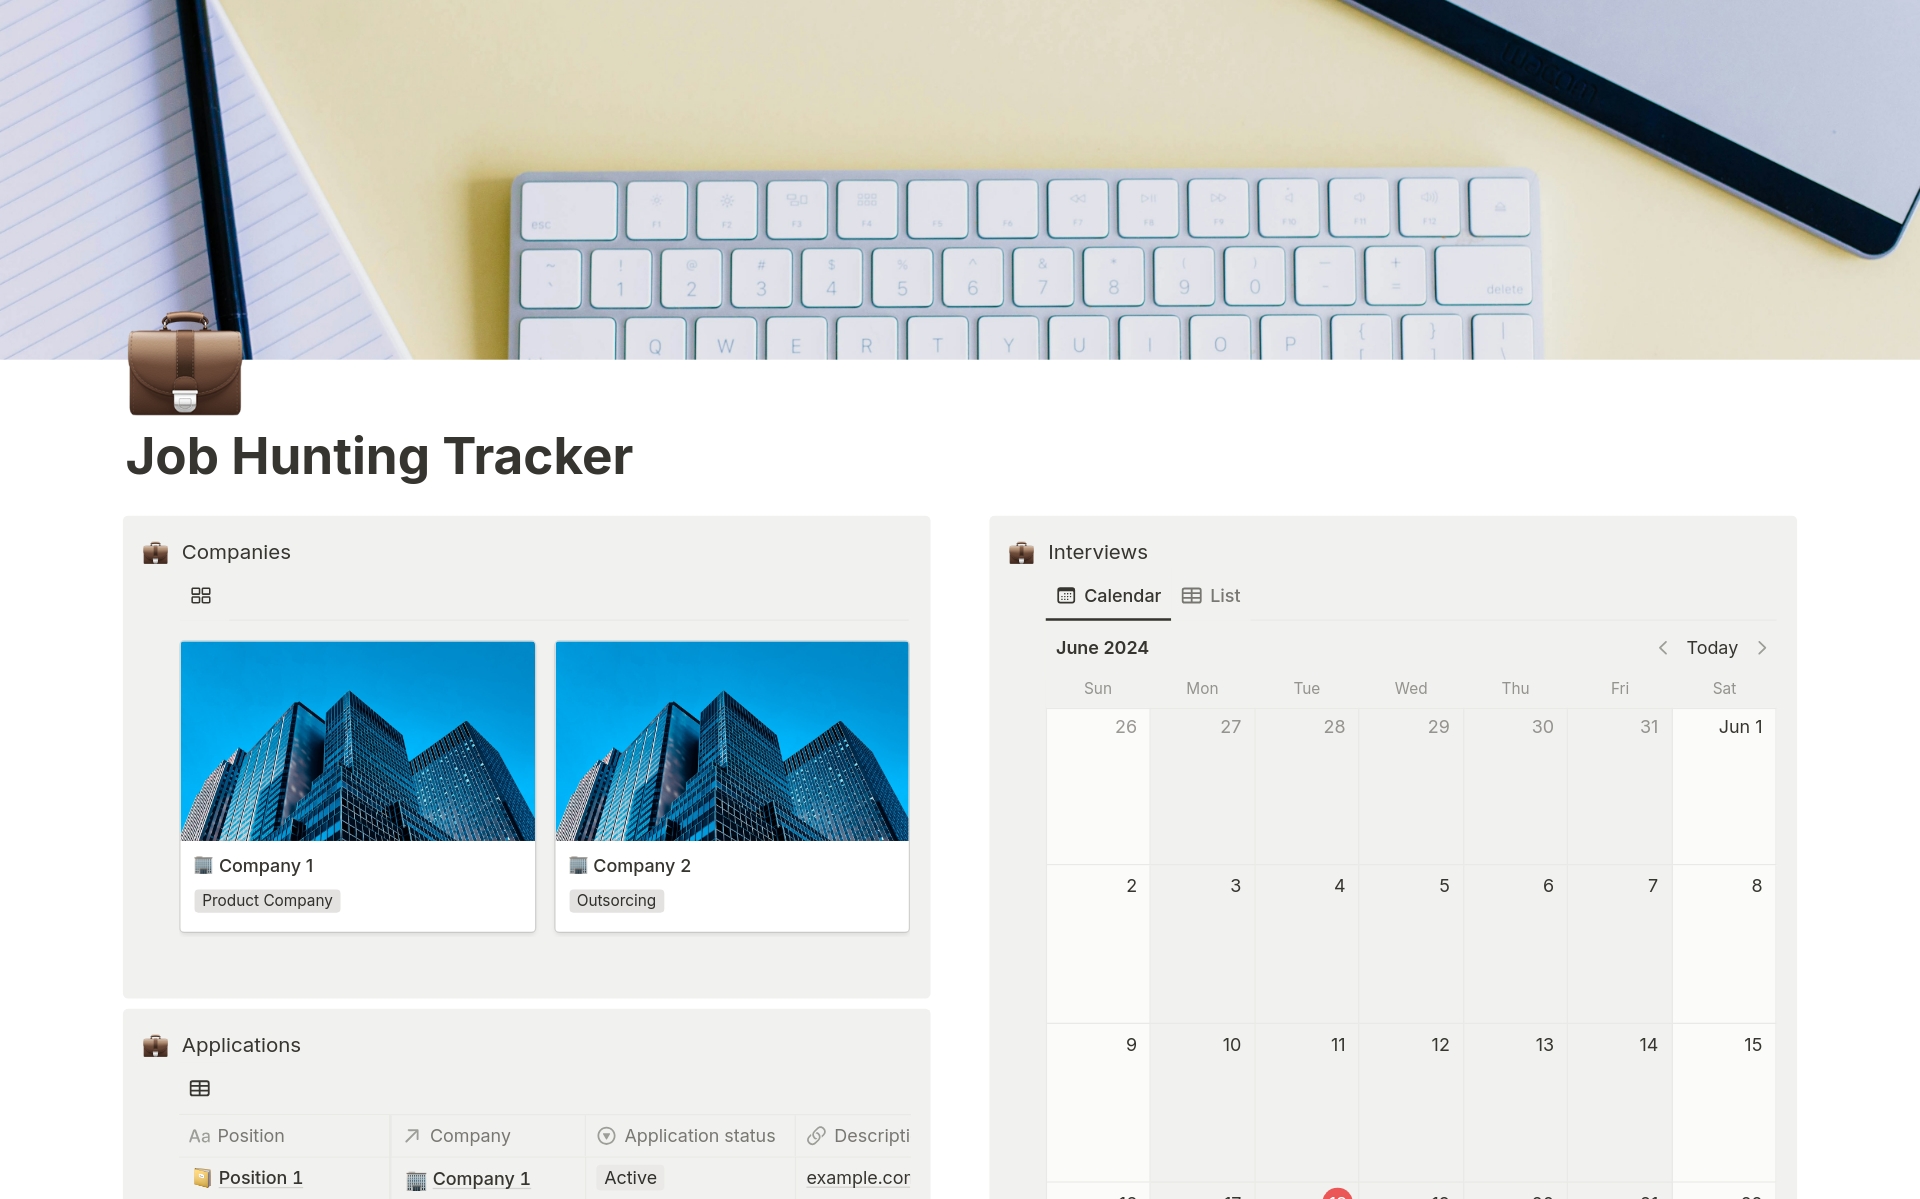 Take charge of your job search with our Notion Job Hunting Tracker. Organize employers, track applications, and manage interviews with ease. Stay focused and efficient, and land your dream job faster.